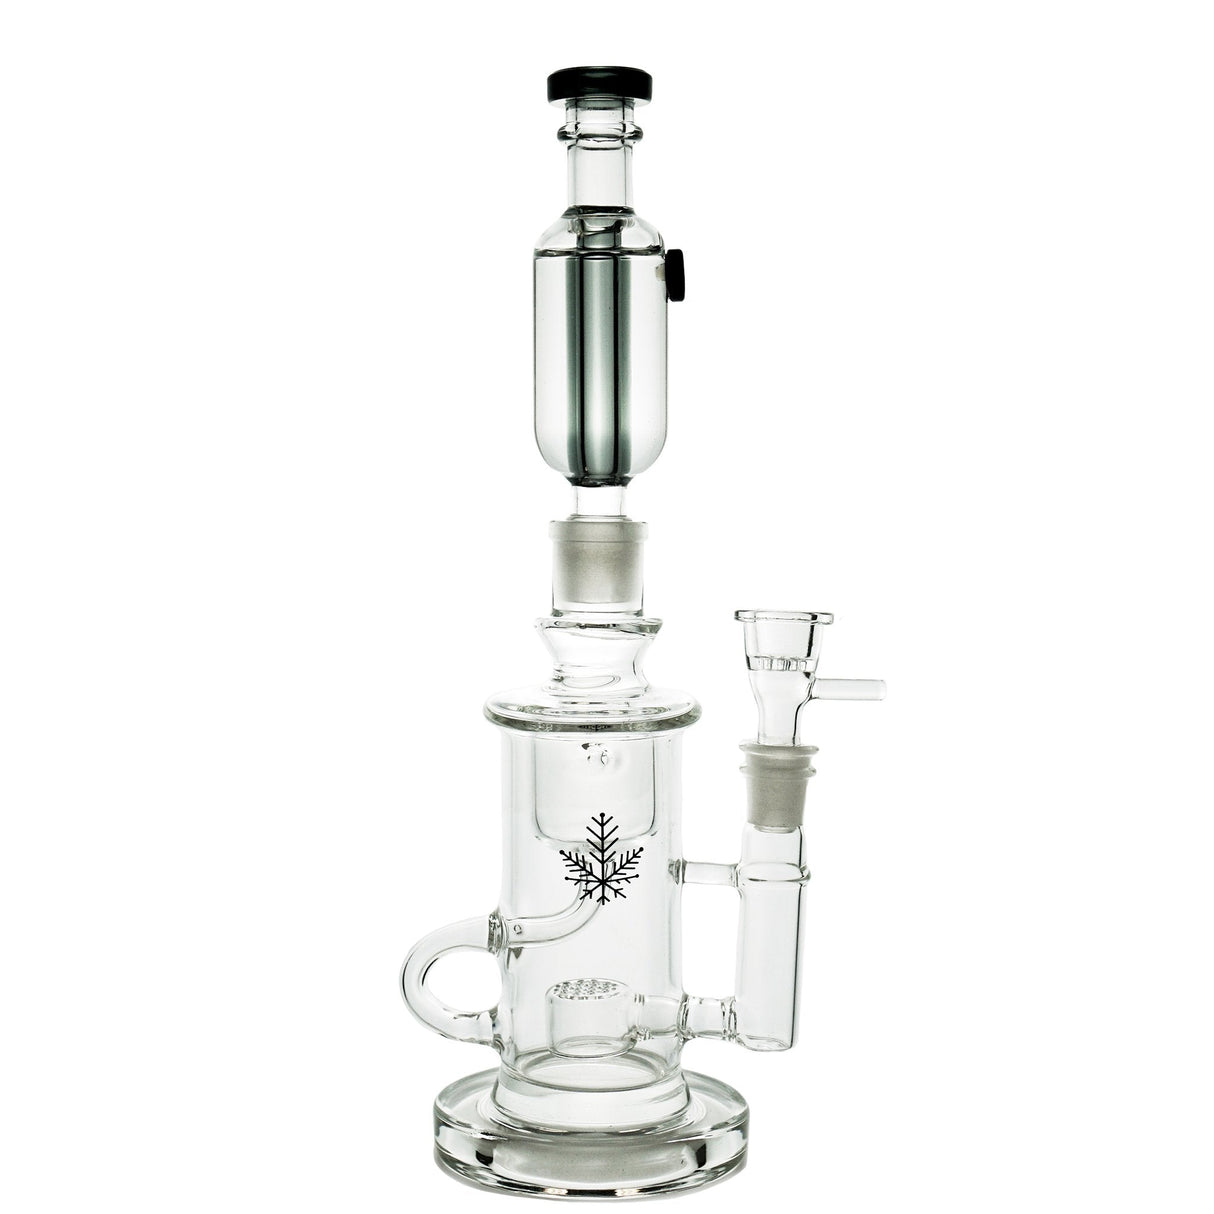 Freeze Pipe Klein Recycler Dab Rig with Quartz Percolator and Recycler Design, Front View